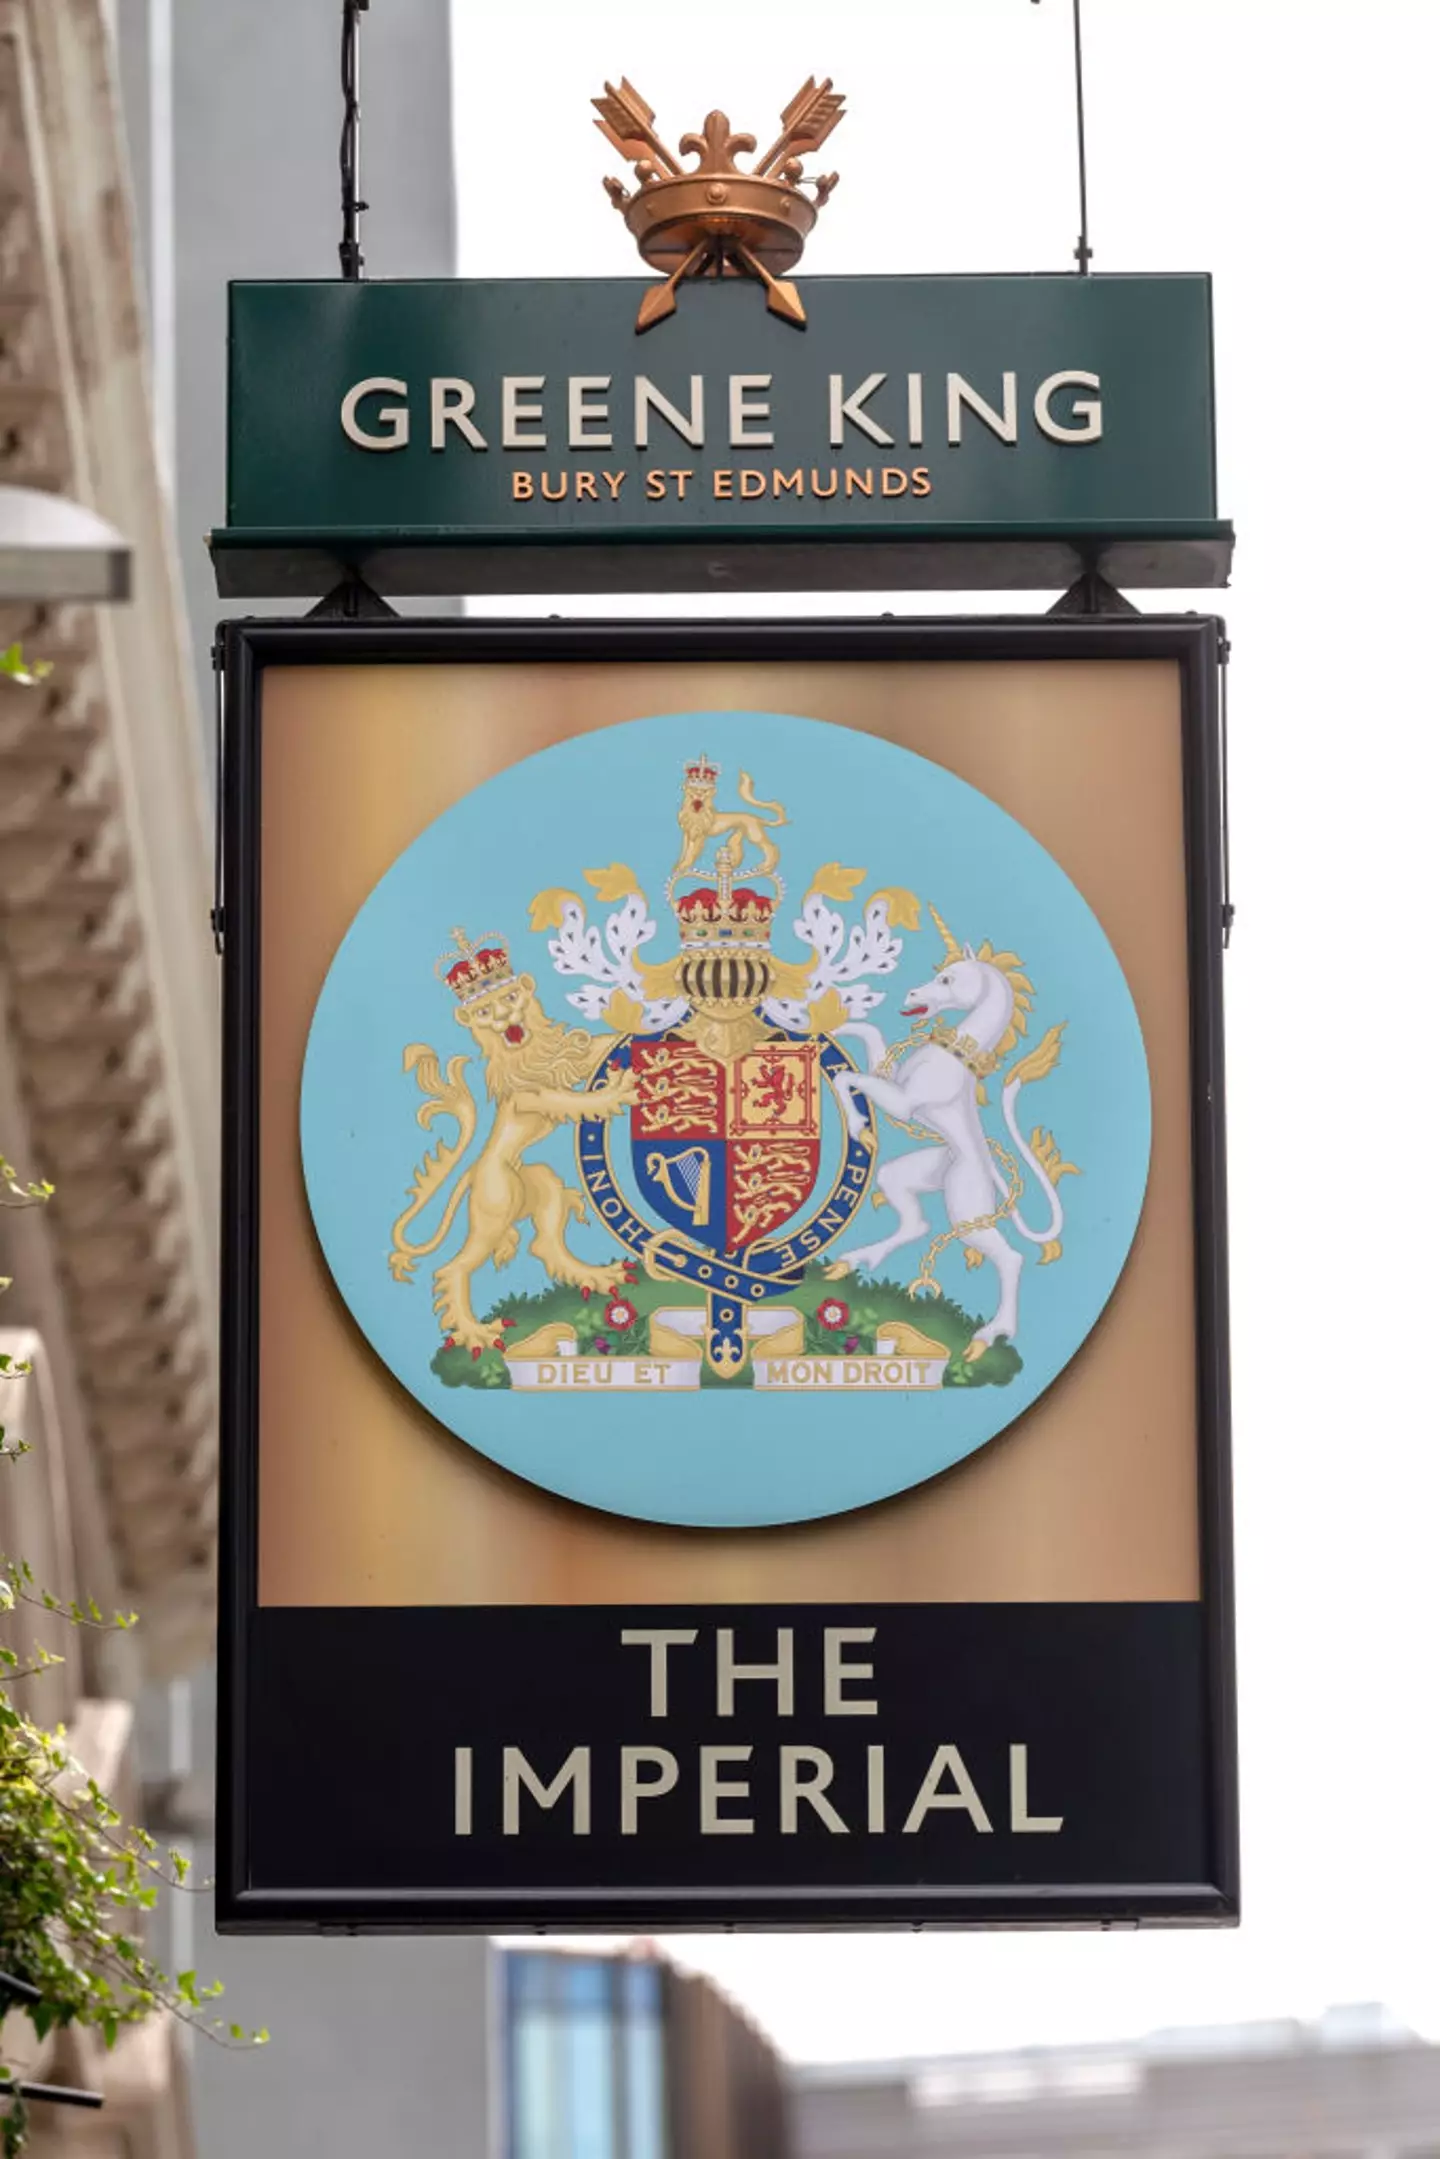 More than 1,600 Greene King pubs are participating in the deal.